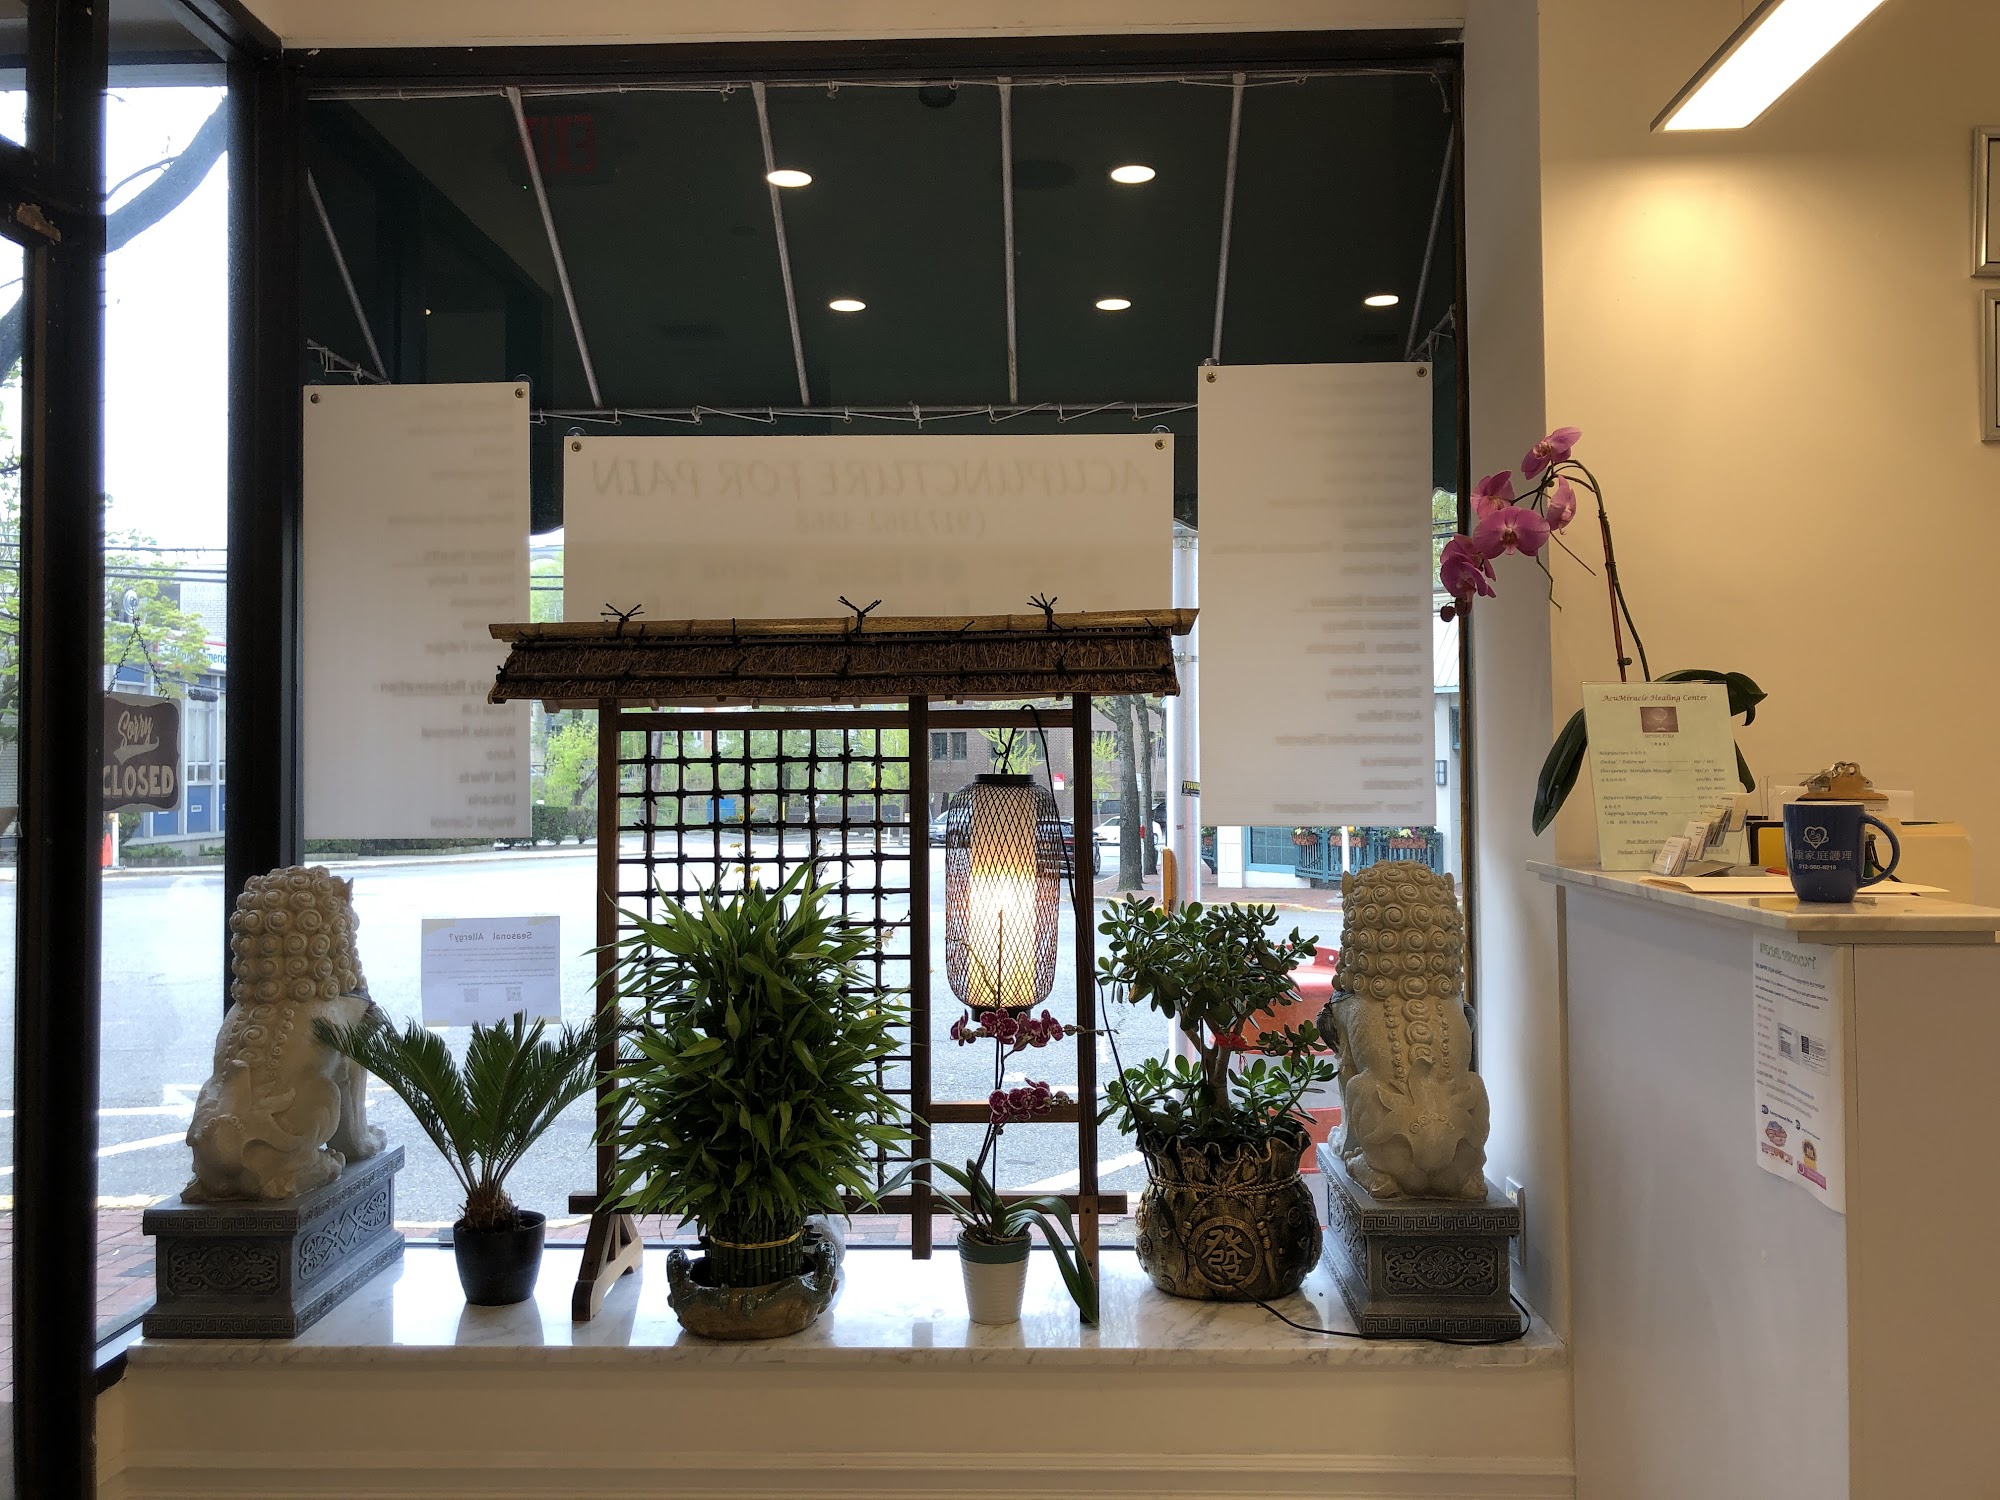 AcuMiracle Acupuncture 23A Middle Neck Rd, Great Neck Plaza New York 11021